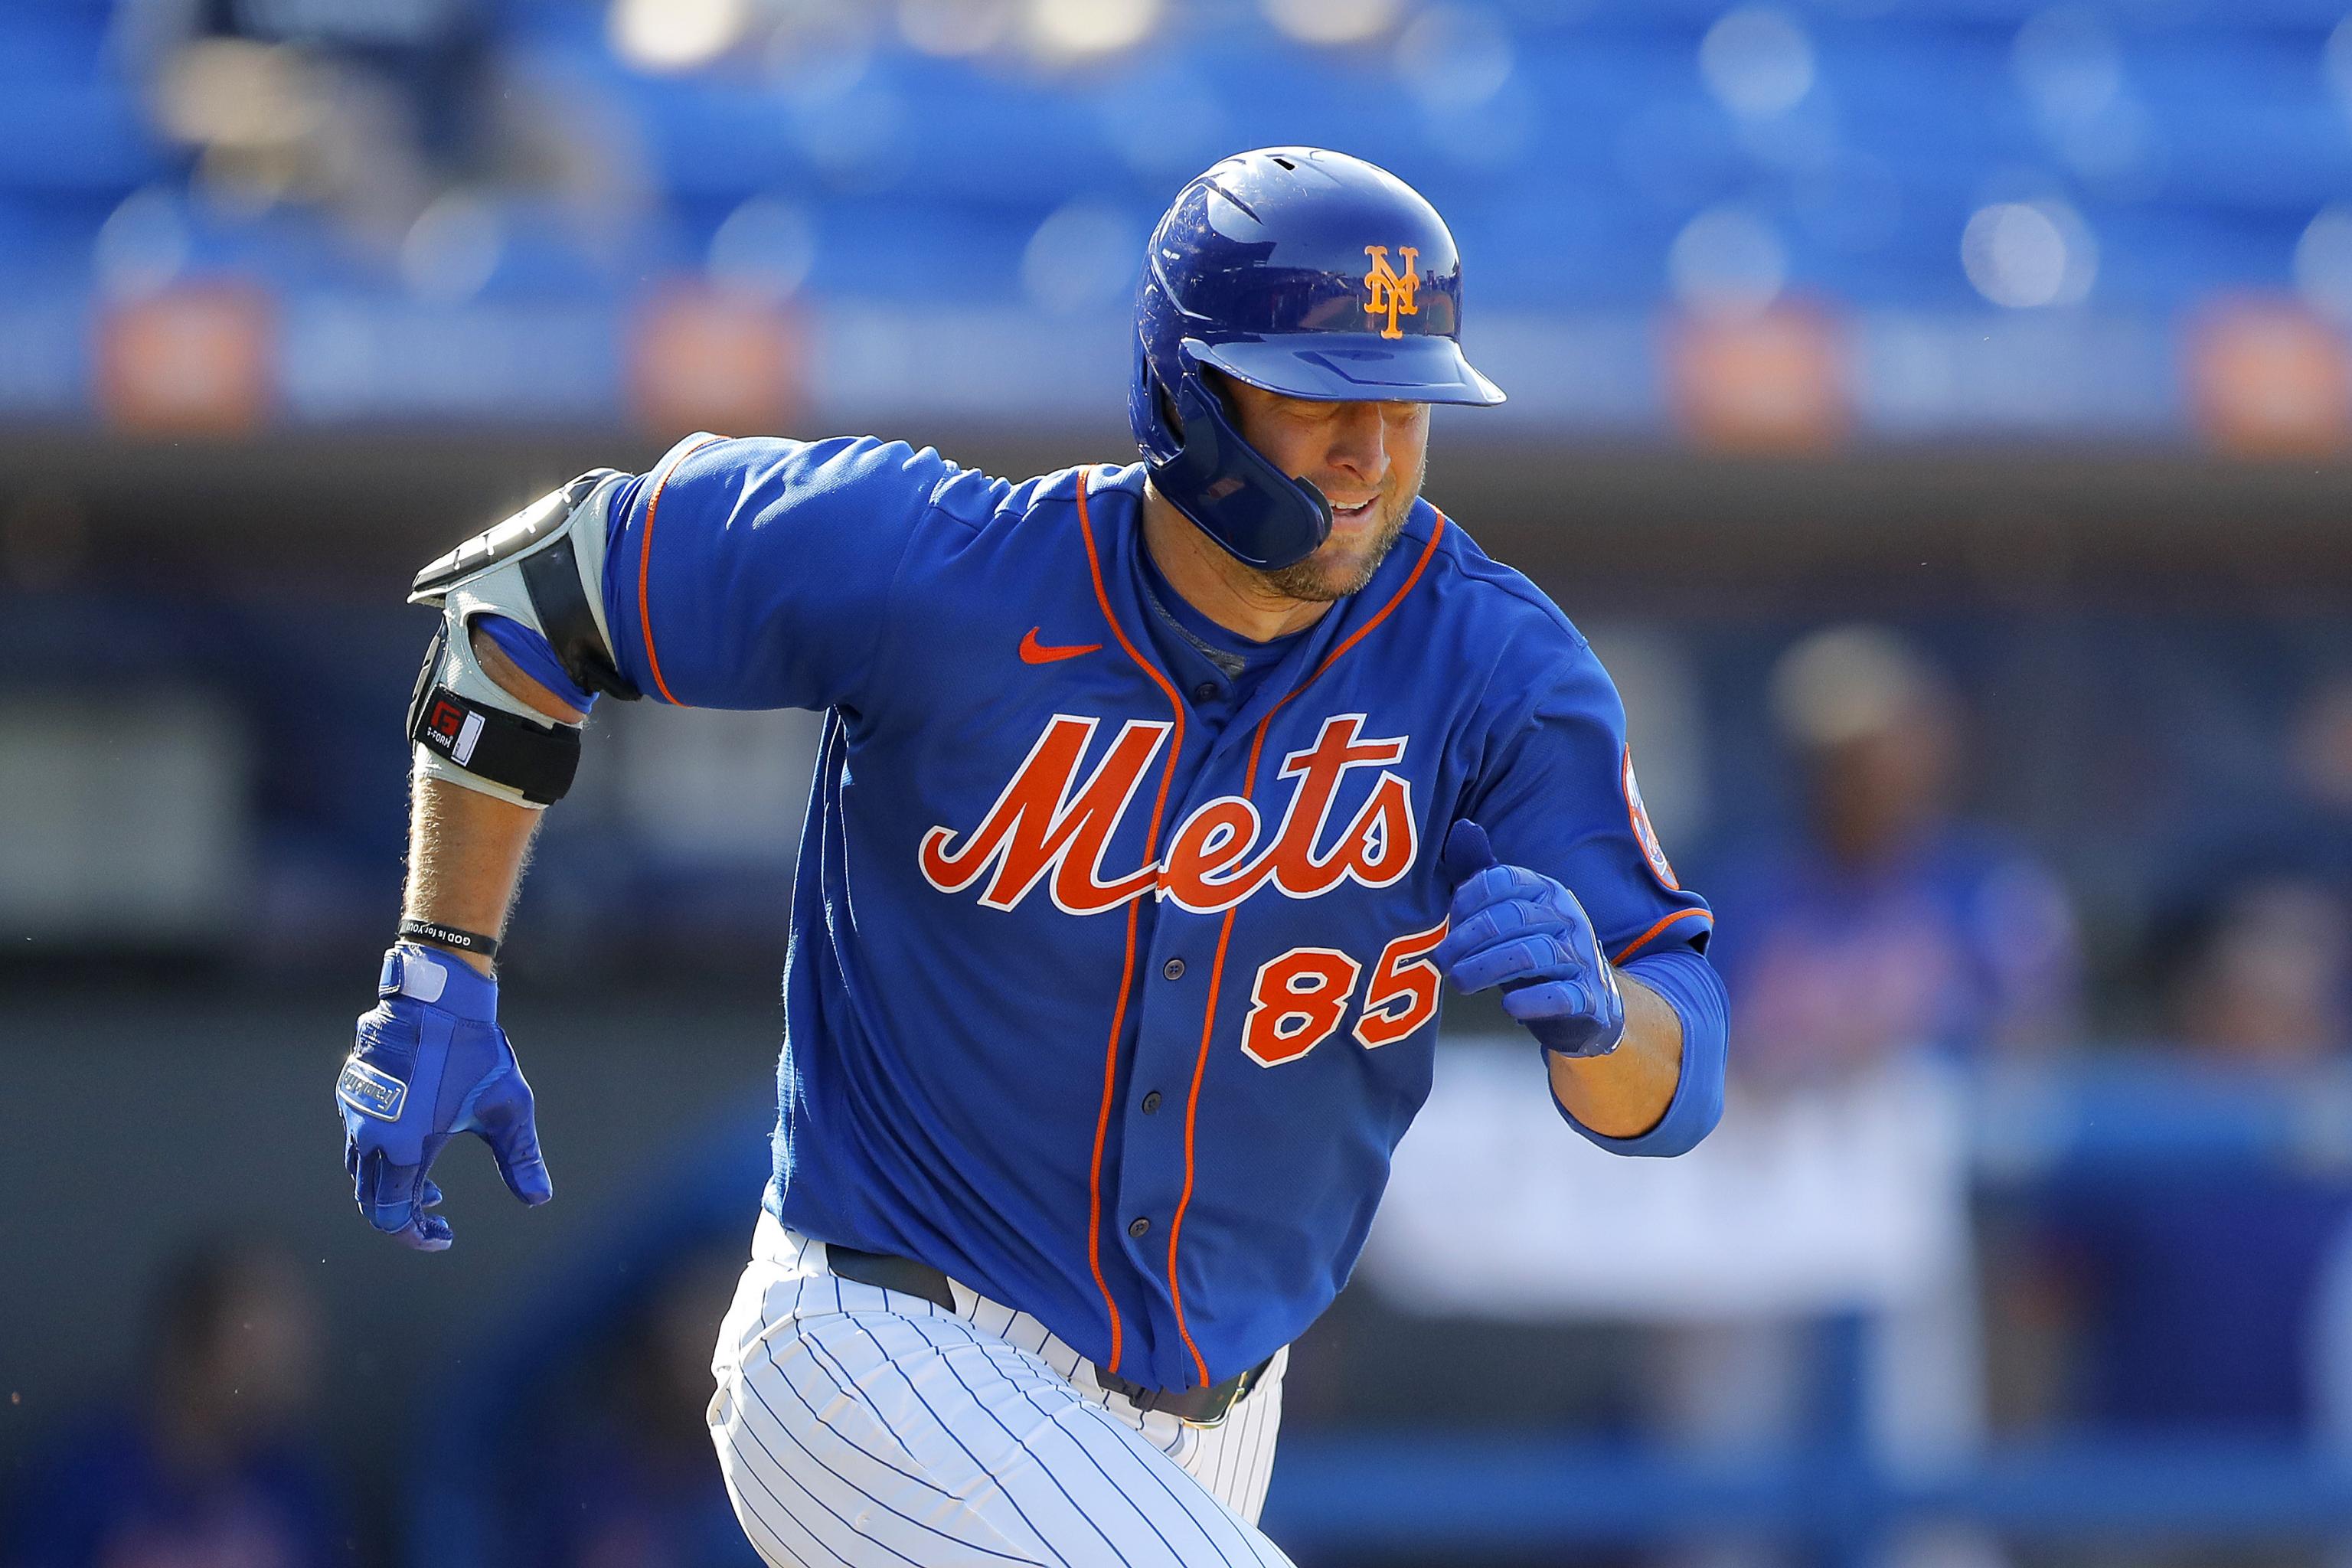 Tim Tebow Jerseys Can Now Be Purchased From the New York Mets Thanks to a  Loophole